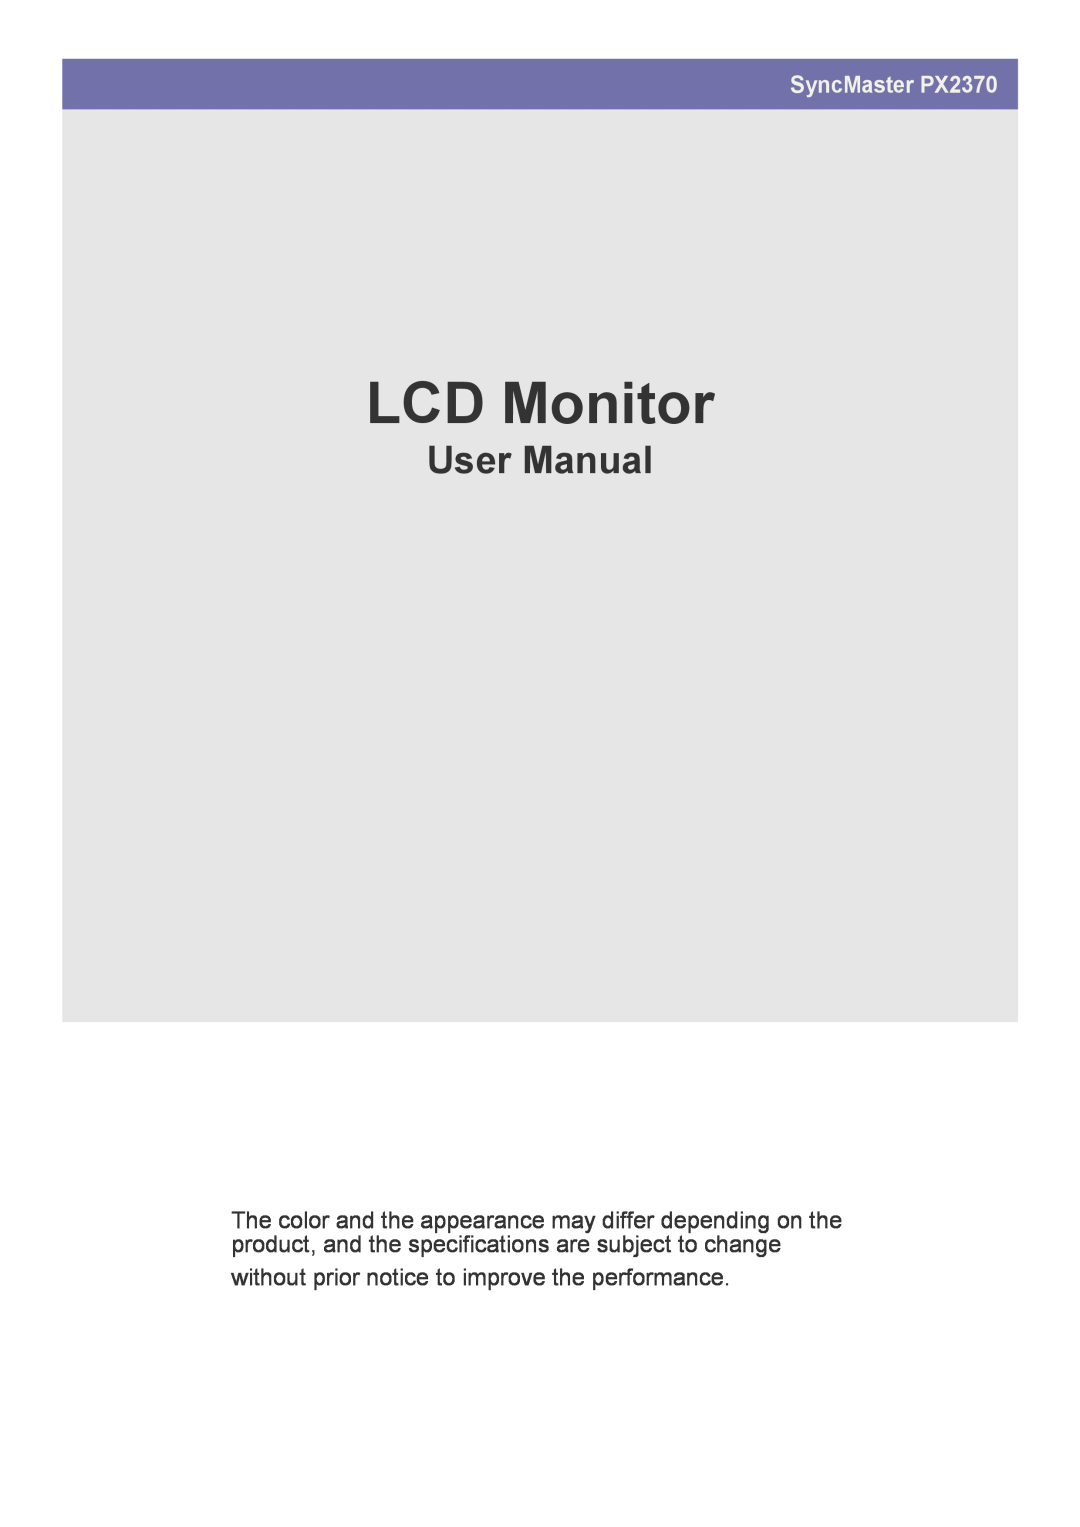 Samsung user manual LCD Monitor, User Manual, SyncMaster PX2370, without prior notice to improve the performance 